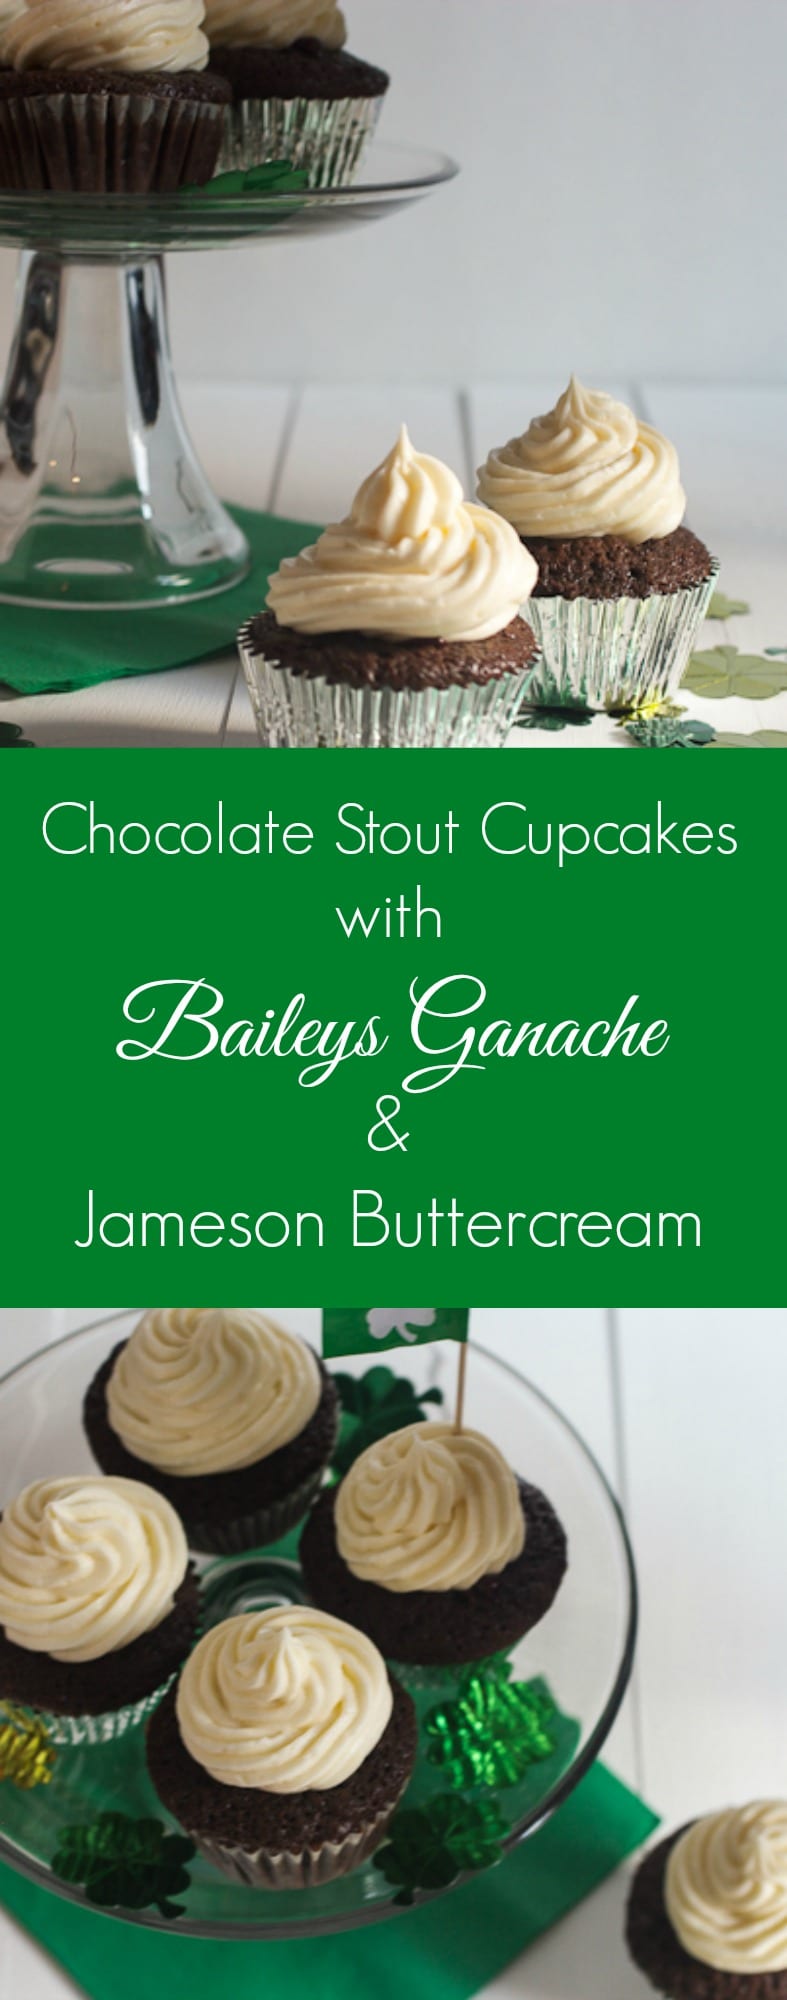 Chocolate Stout Cupcakes with Baileys Ganache and Jameson Buttercream for St. Patrick's Day | girlinthelittleredkitchen.com